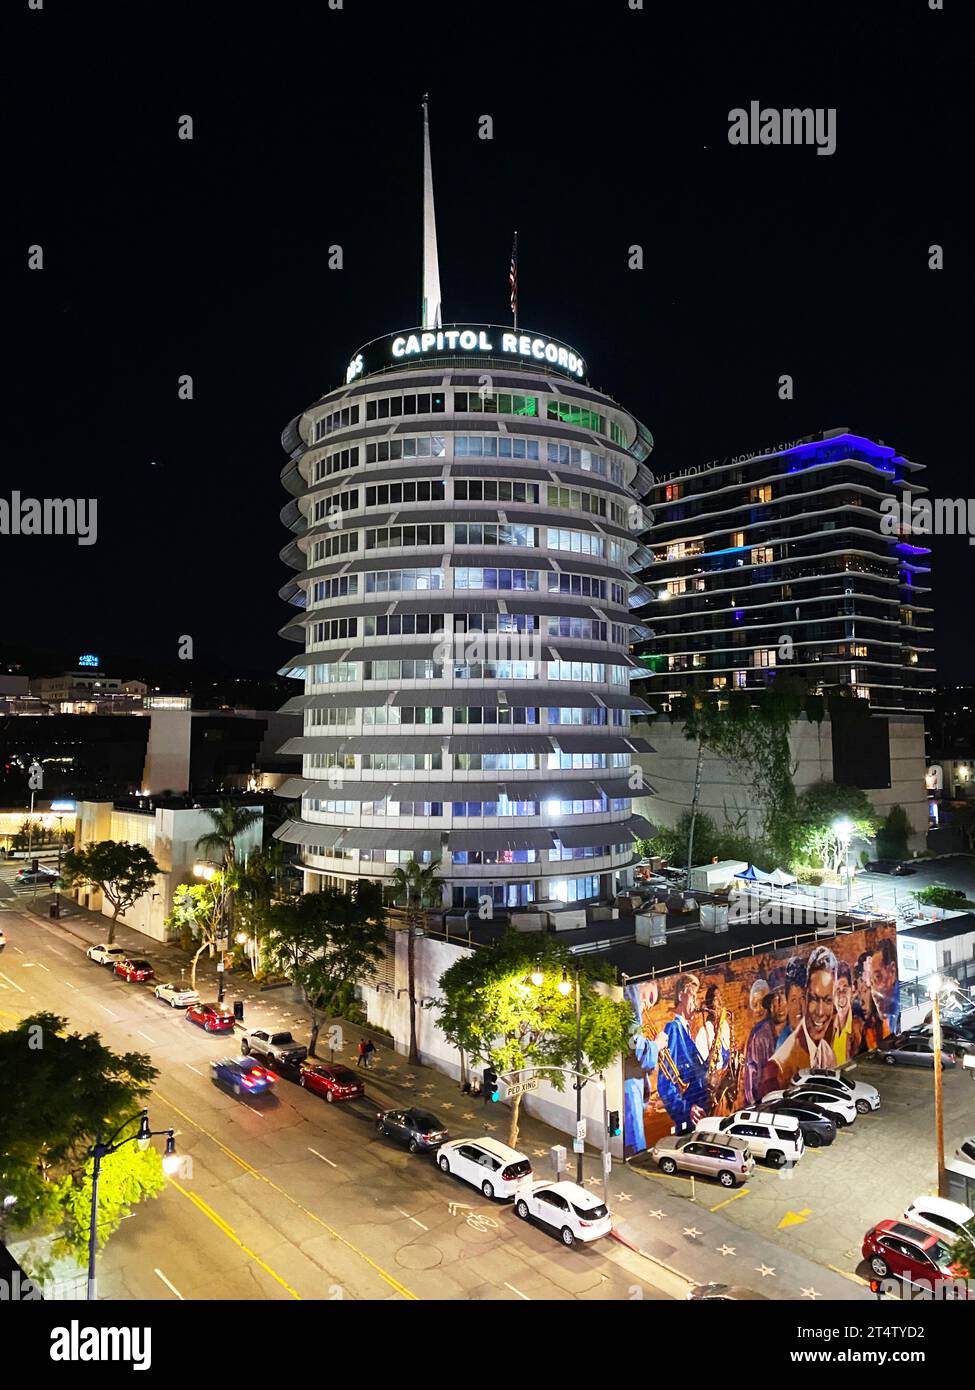 Capitol Records building in Los Angeles at night Stock Photo